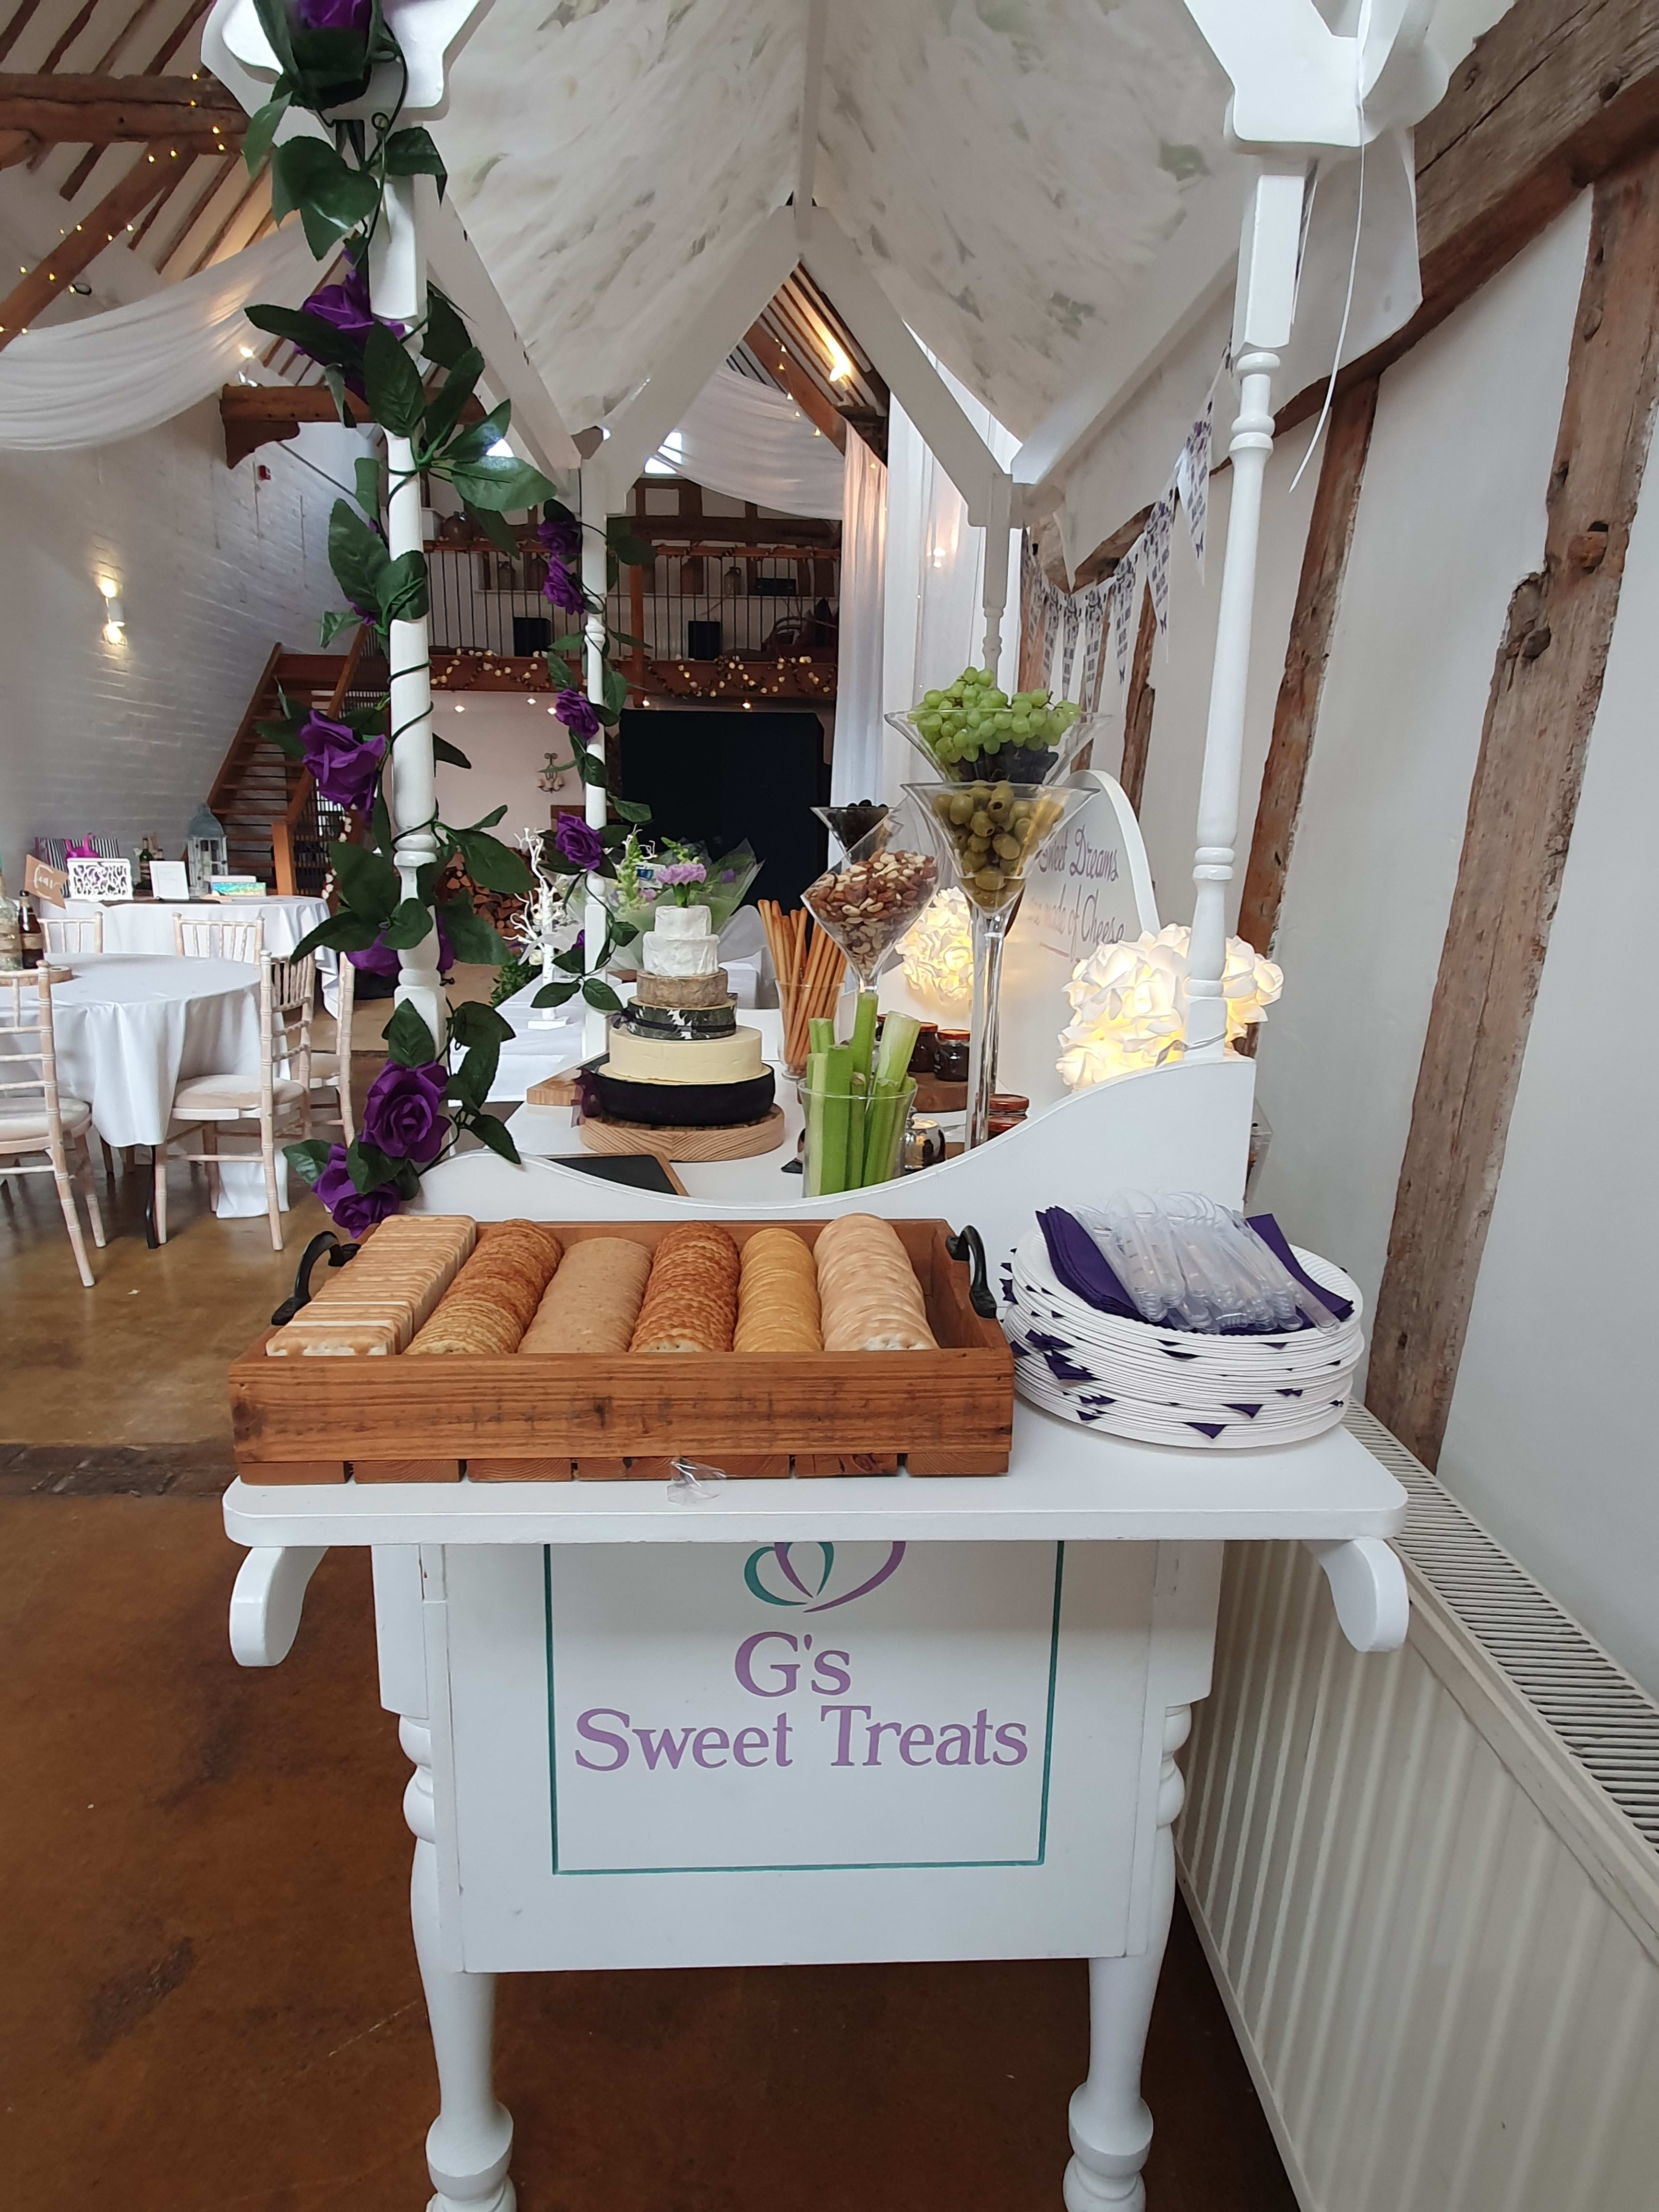 Hire us for your event – Sweet Gifts